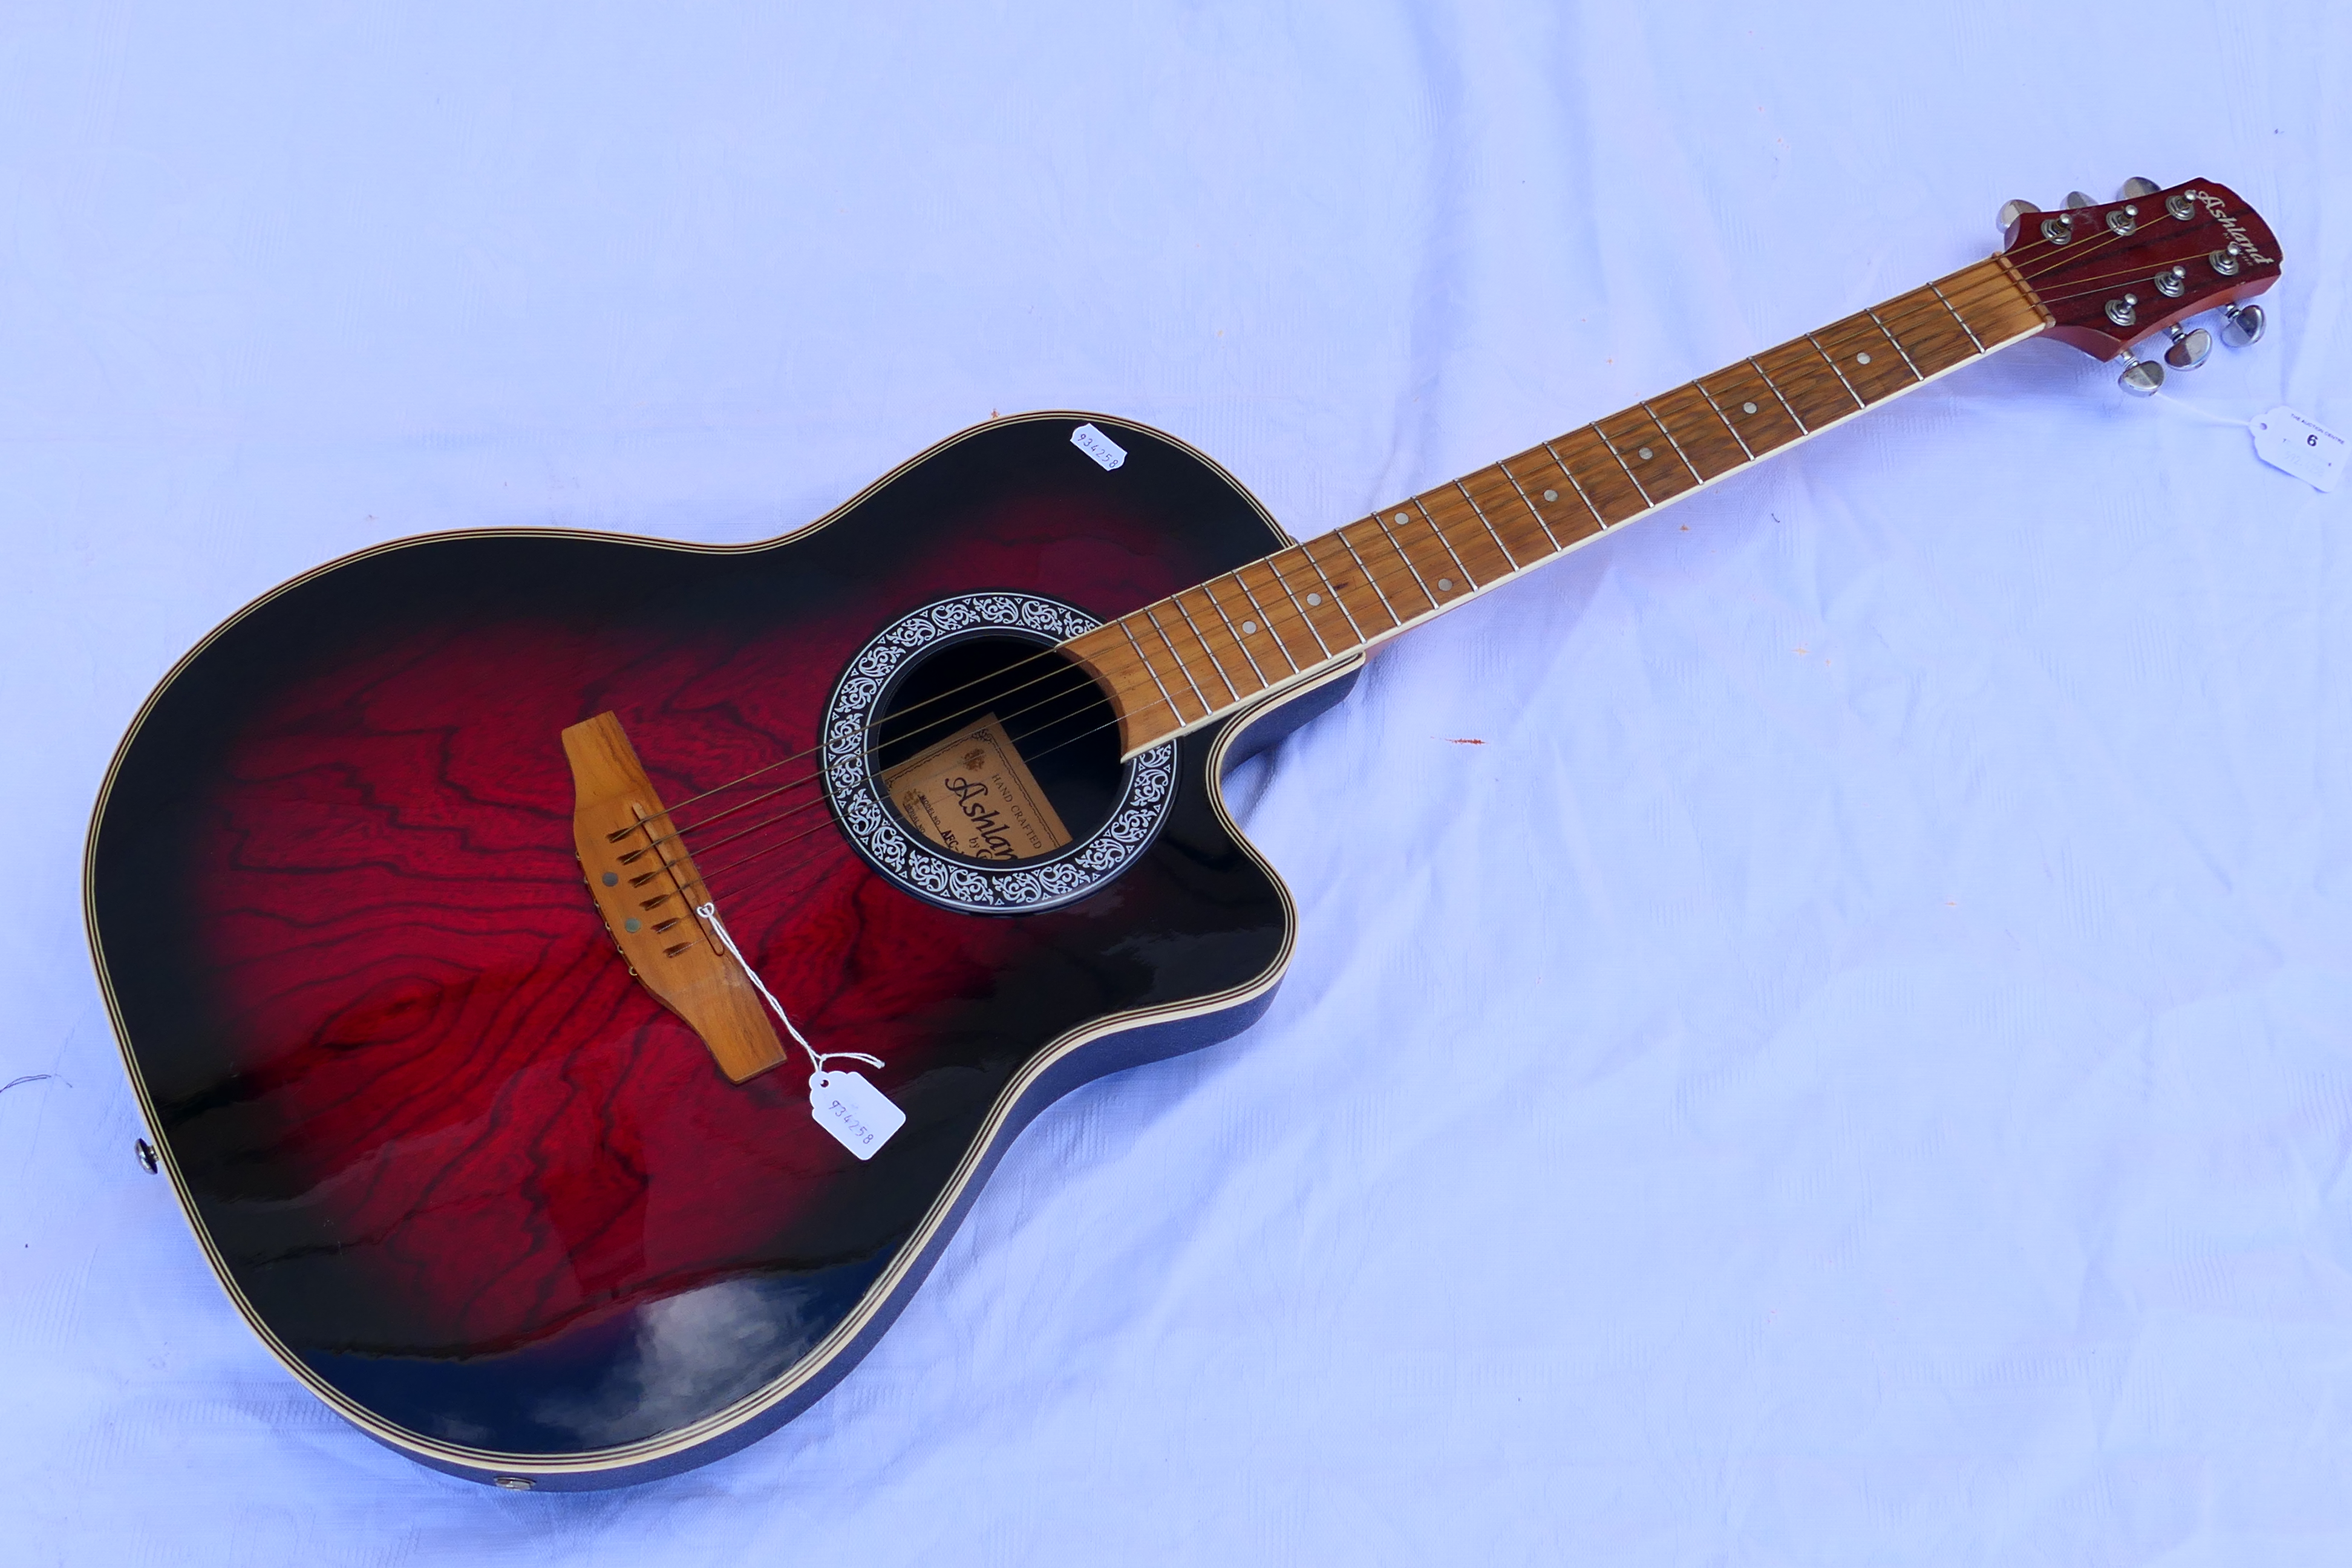 Ashland by Crafter - An electro acoustic guitar, model AFC - 150 / RS.